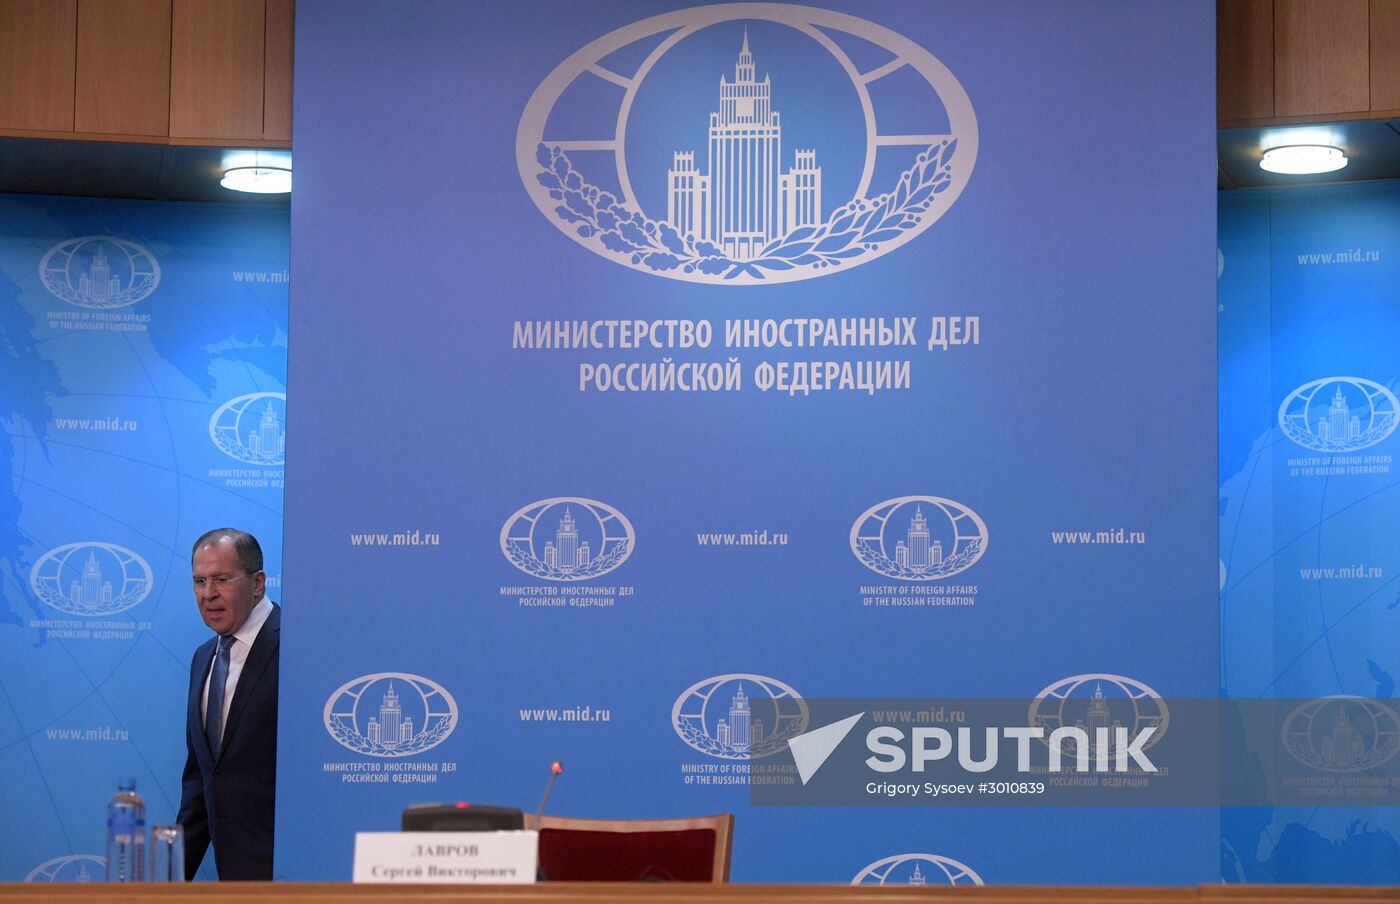 News conference with Foreign Minister Sergei Lavrov